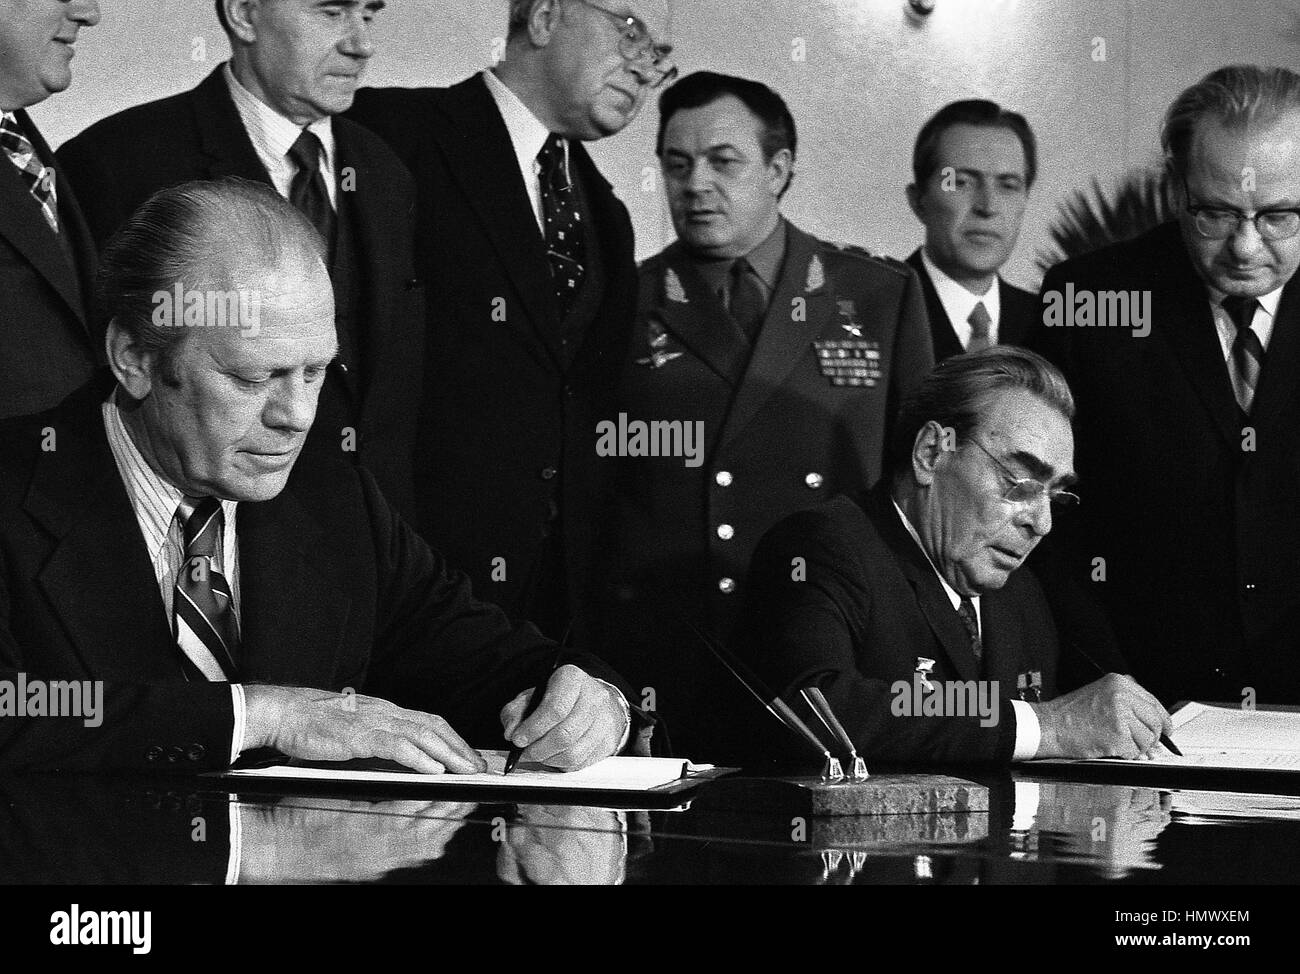 U.S President Gerald Ford and Soviet General Secretary Leonid Brezhnev sign a joint communique on the limitation of strategic offensive arms in the conference hall of the Okeansky Sanatorium November 24, 1974 in Vladivostok, Russia, USSR. Ford is in Vladivostok for a two-day summit on Arms Control. Stock Photo